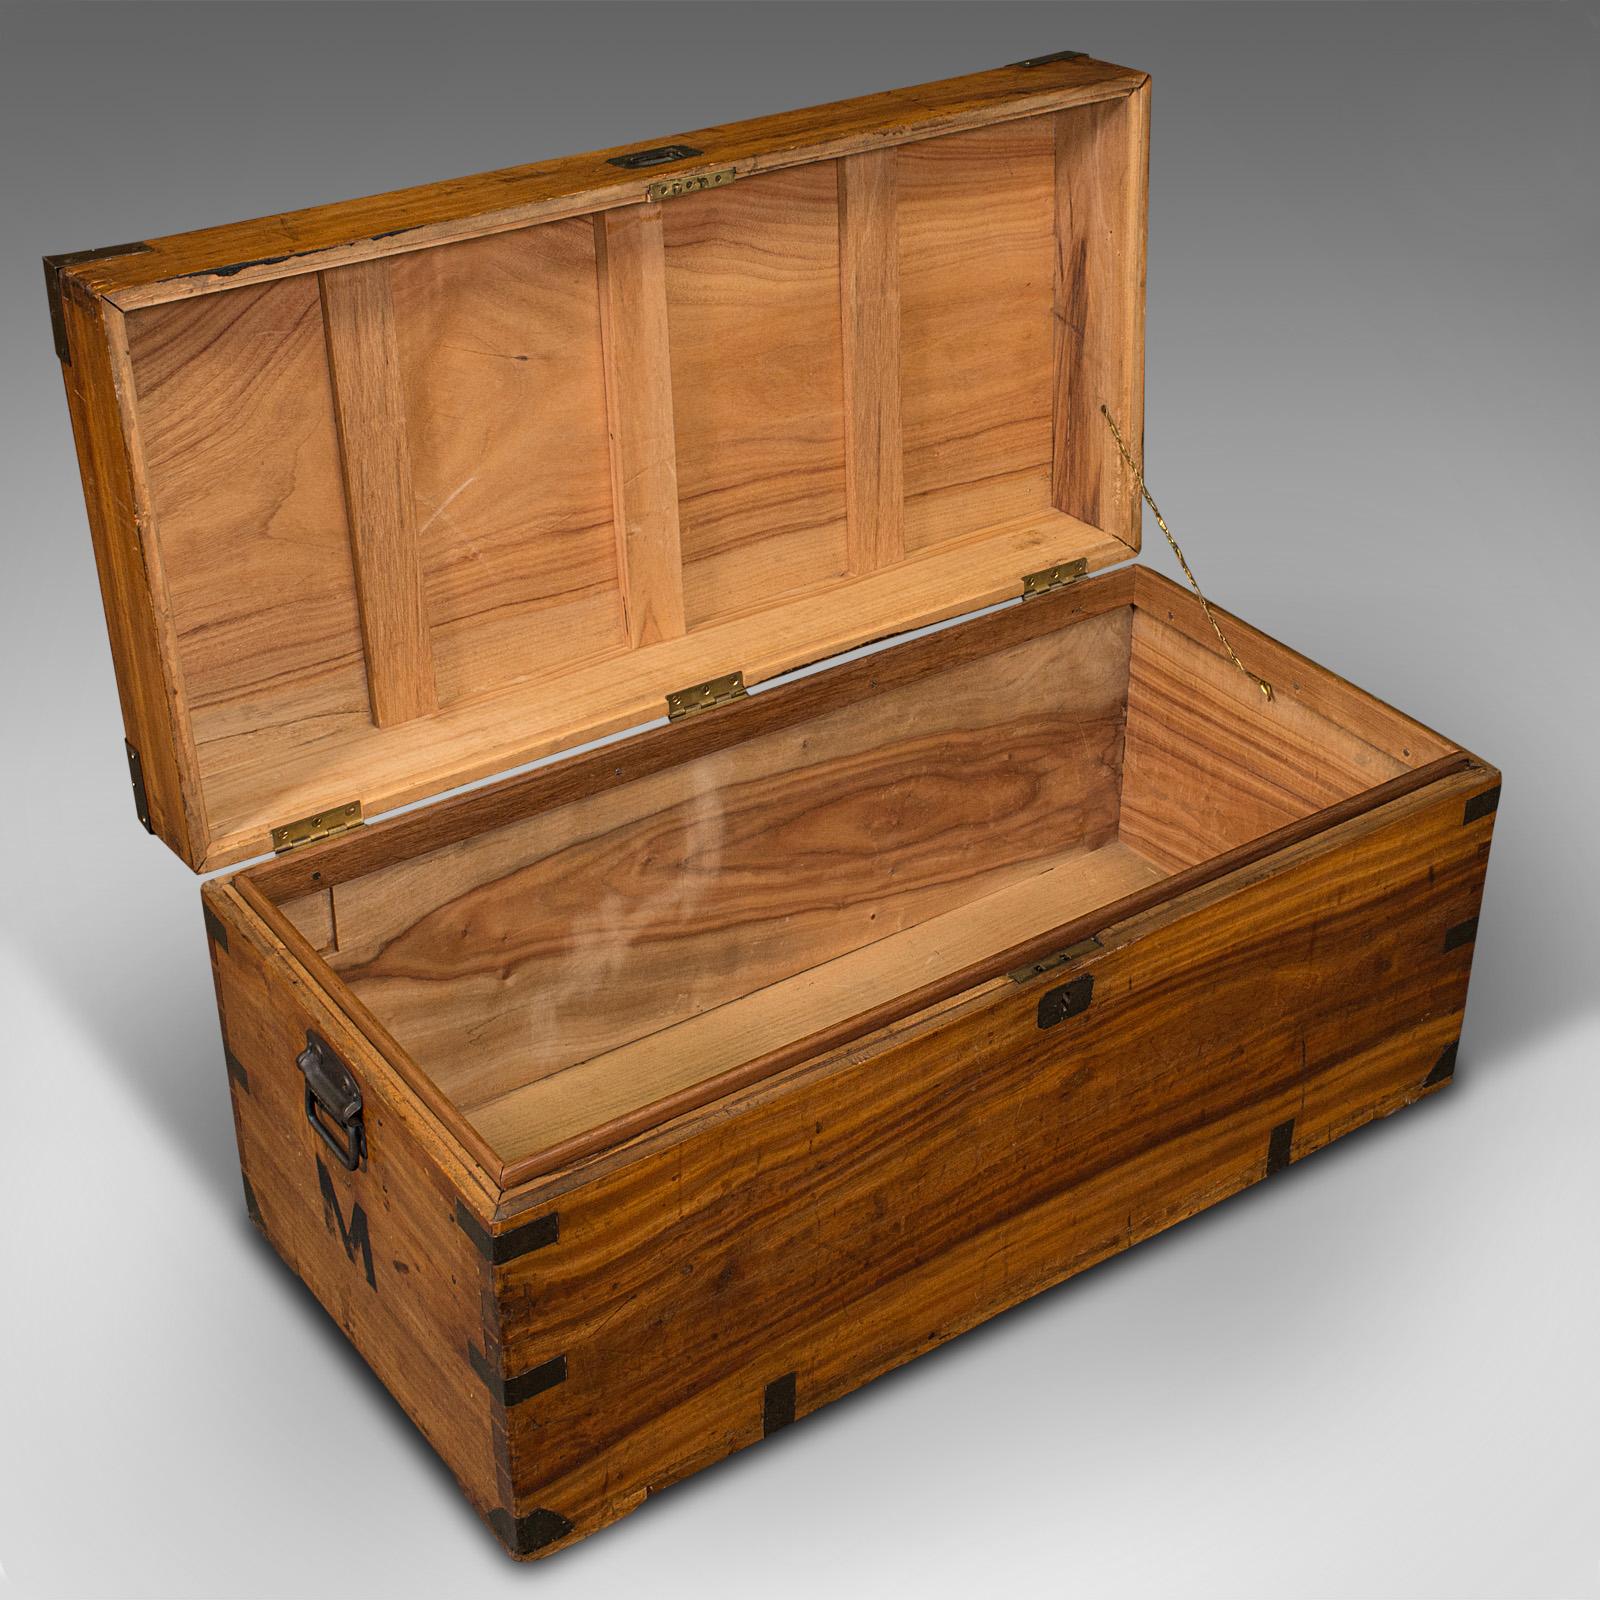 Vintage Campaign Chest, English, Camphorwood, Military Travel Trunk, Circa 1930 For Sale 1